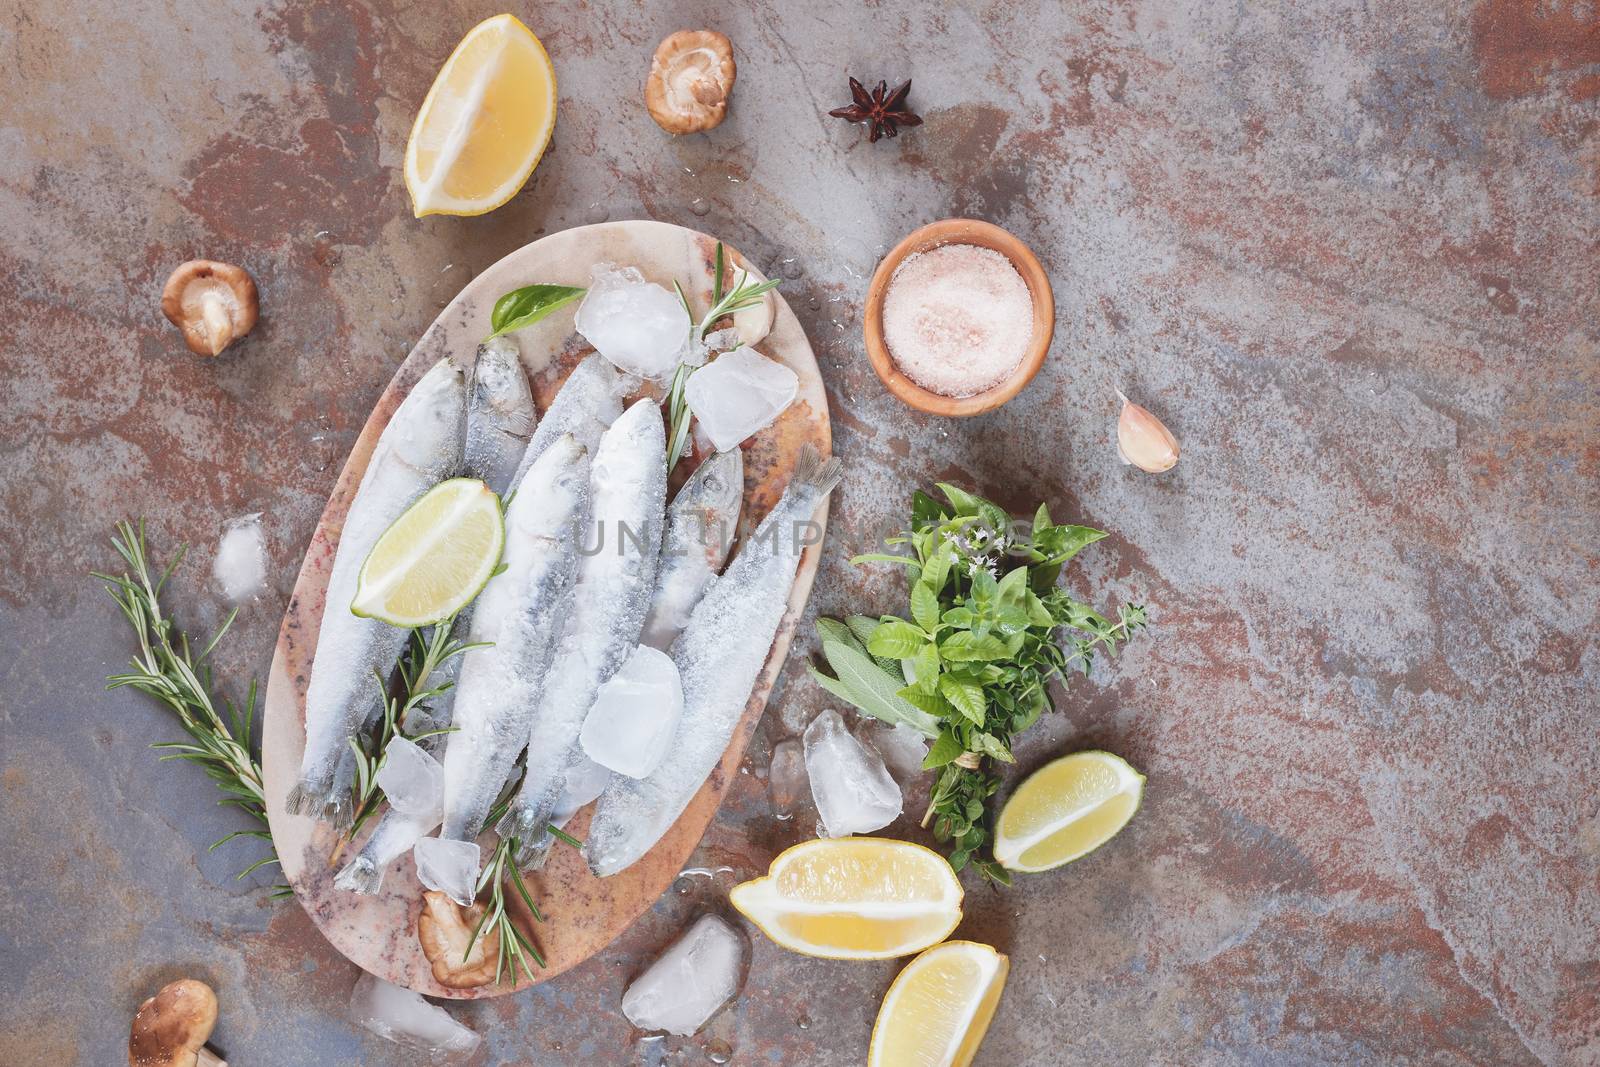 Frozen sardines. High angle view of frozen fish decorated with lemon and herbs on plate.